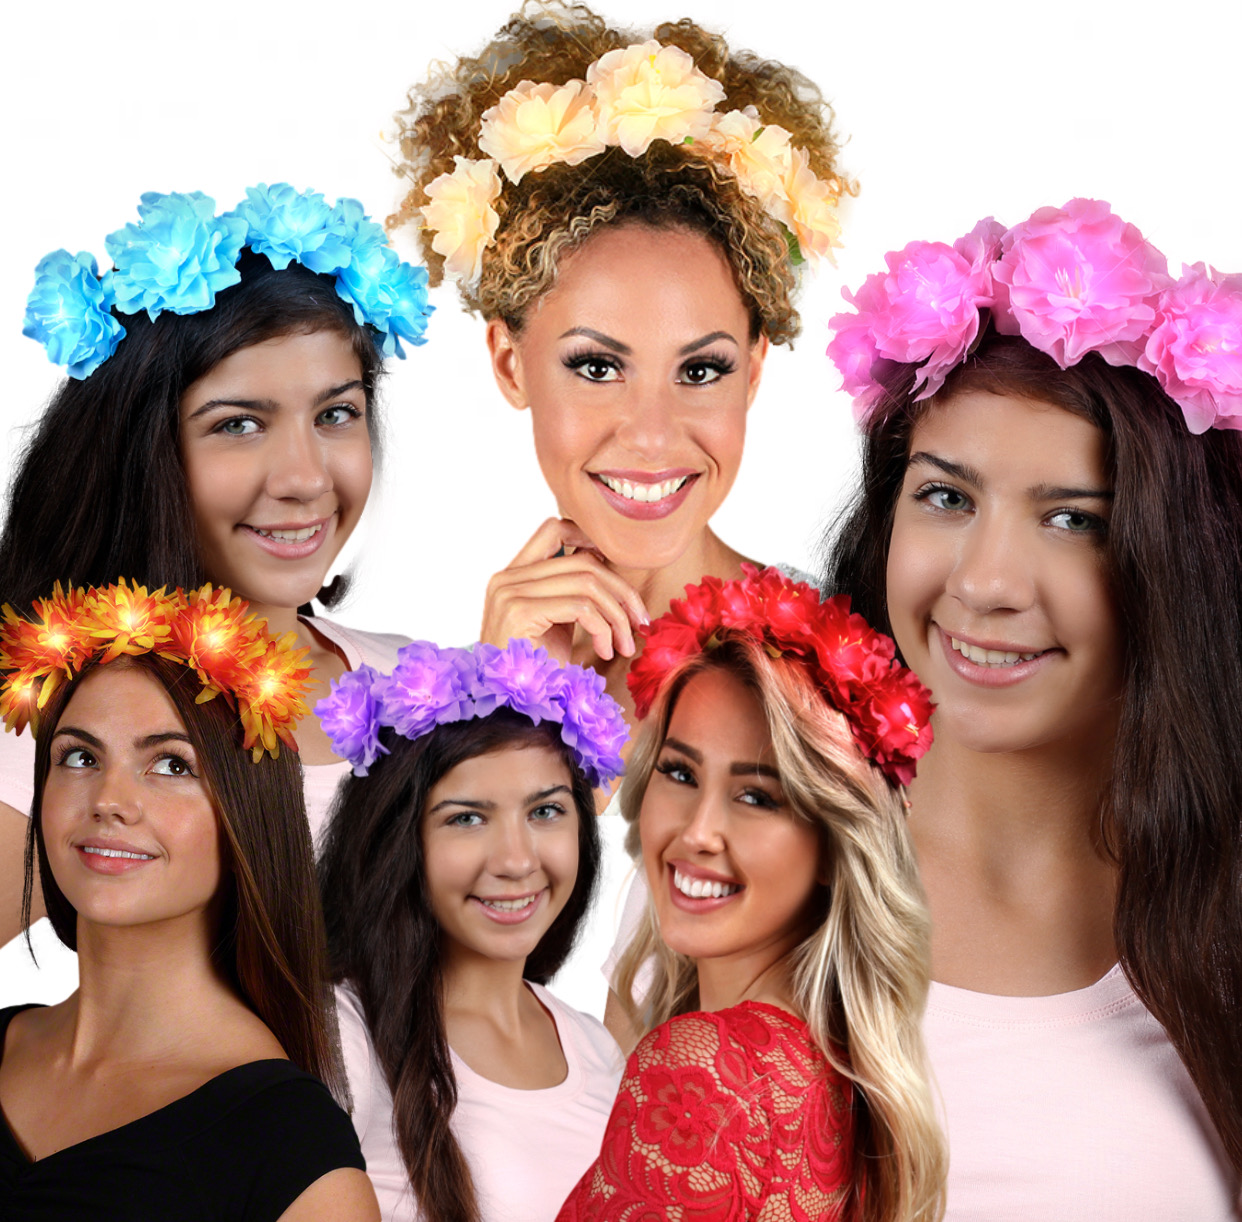 Light Up Flashing Spring Rainbow Wedding Flower Crowns Assortment Pack of 12 All Products 4